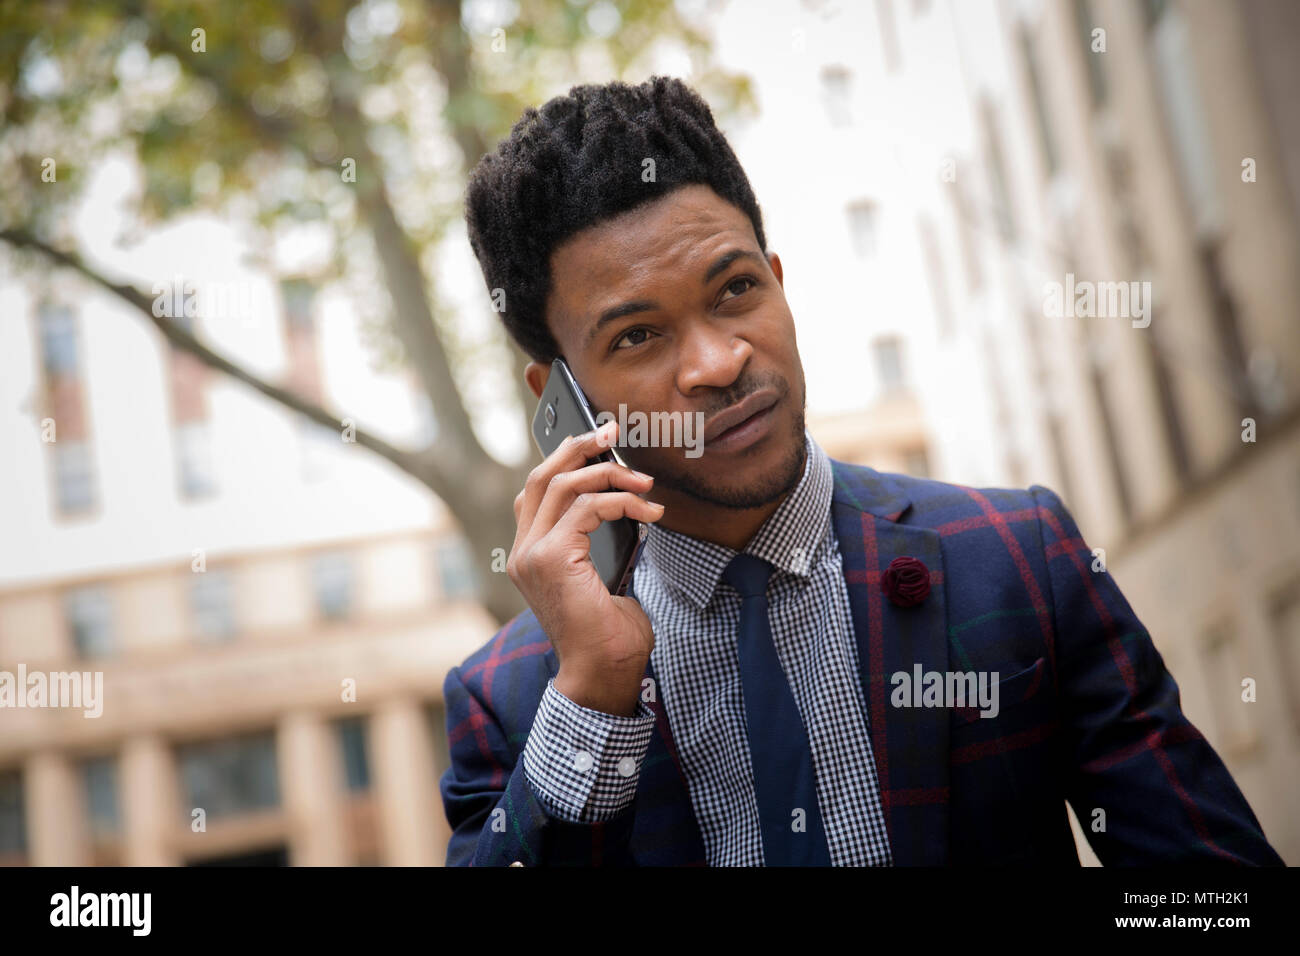 Business man on a phone call Stock Photo